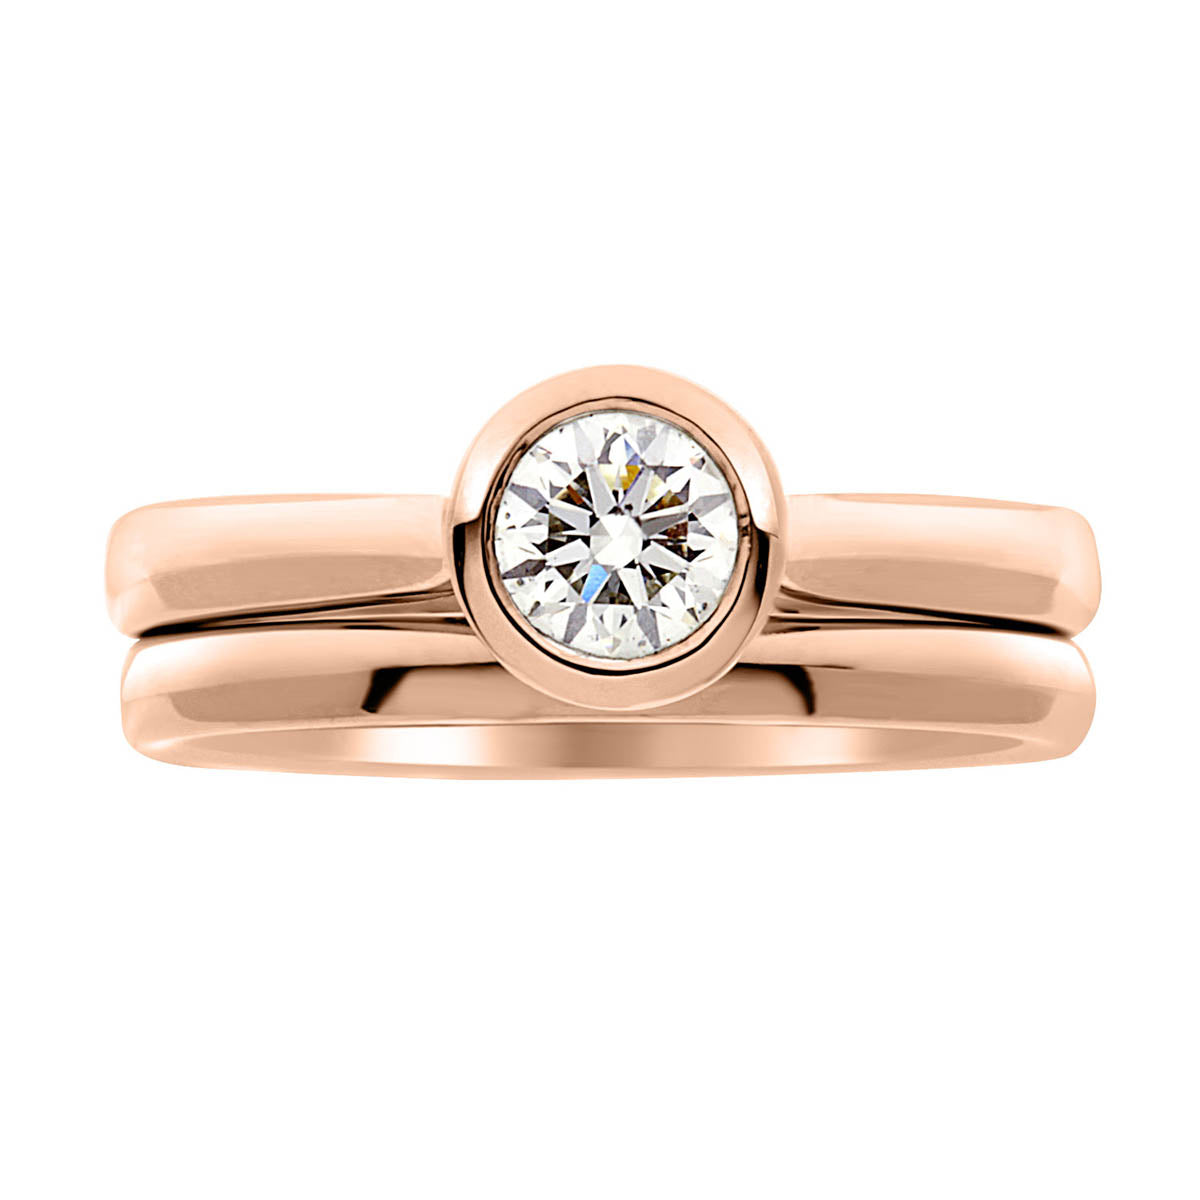 Bezel Set Engagement ring in 18kt yellow gold  with a plain wedding ring